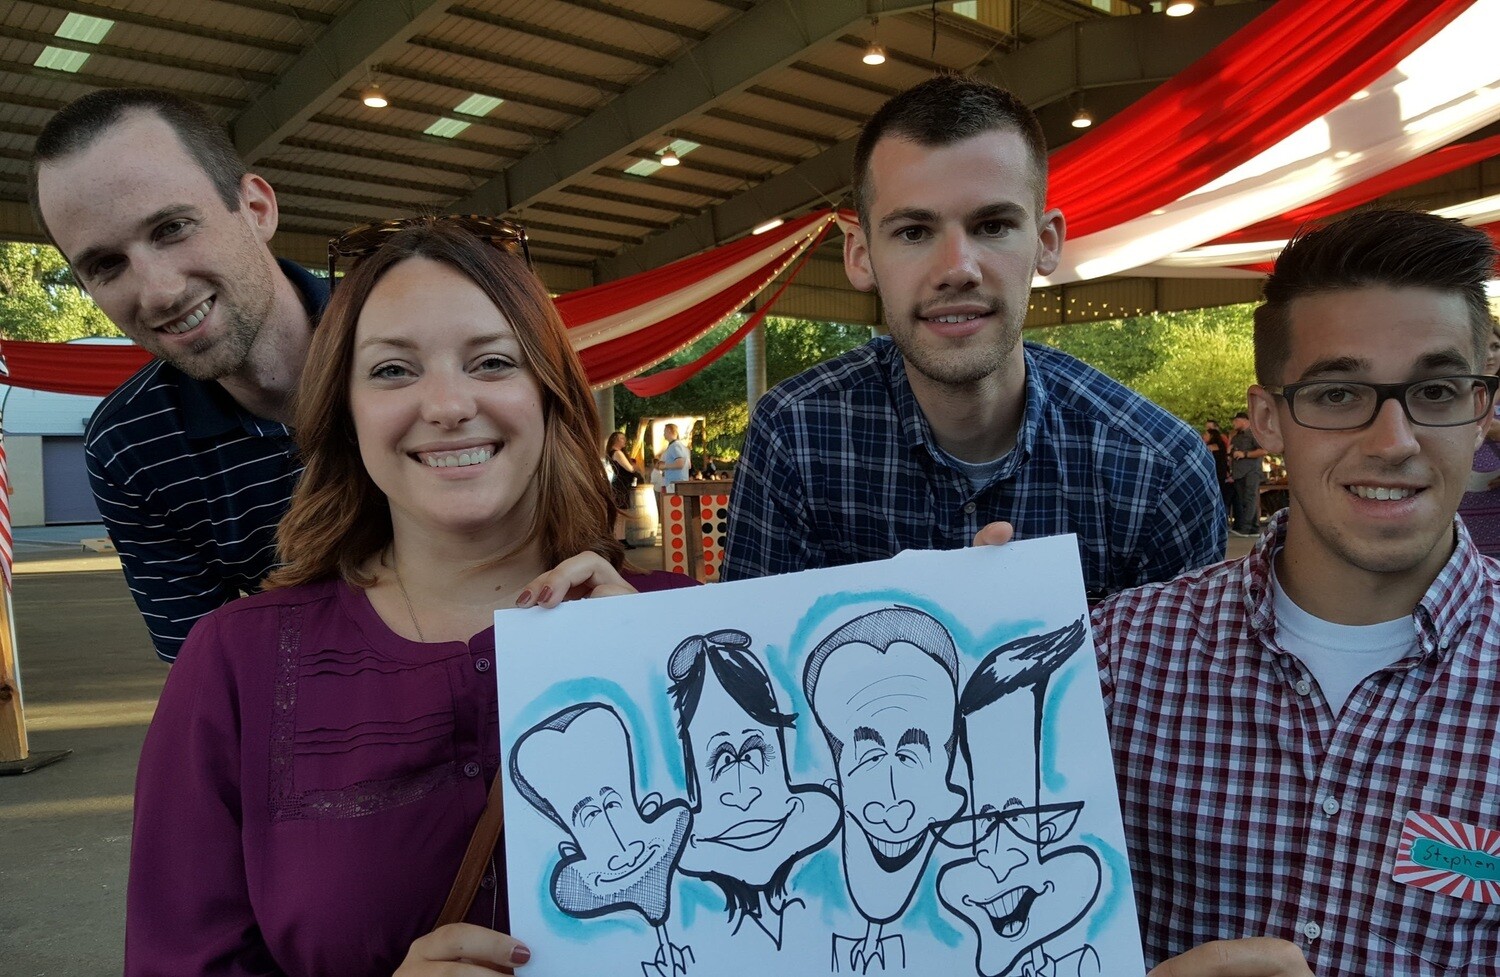 Three to Four Person (Face/Upper Body Only) 11" x 14" Black & White Caricature with Color Highlights